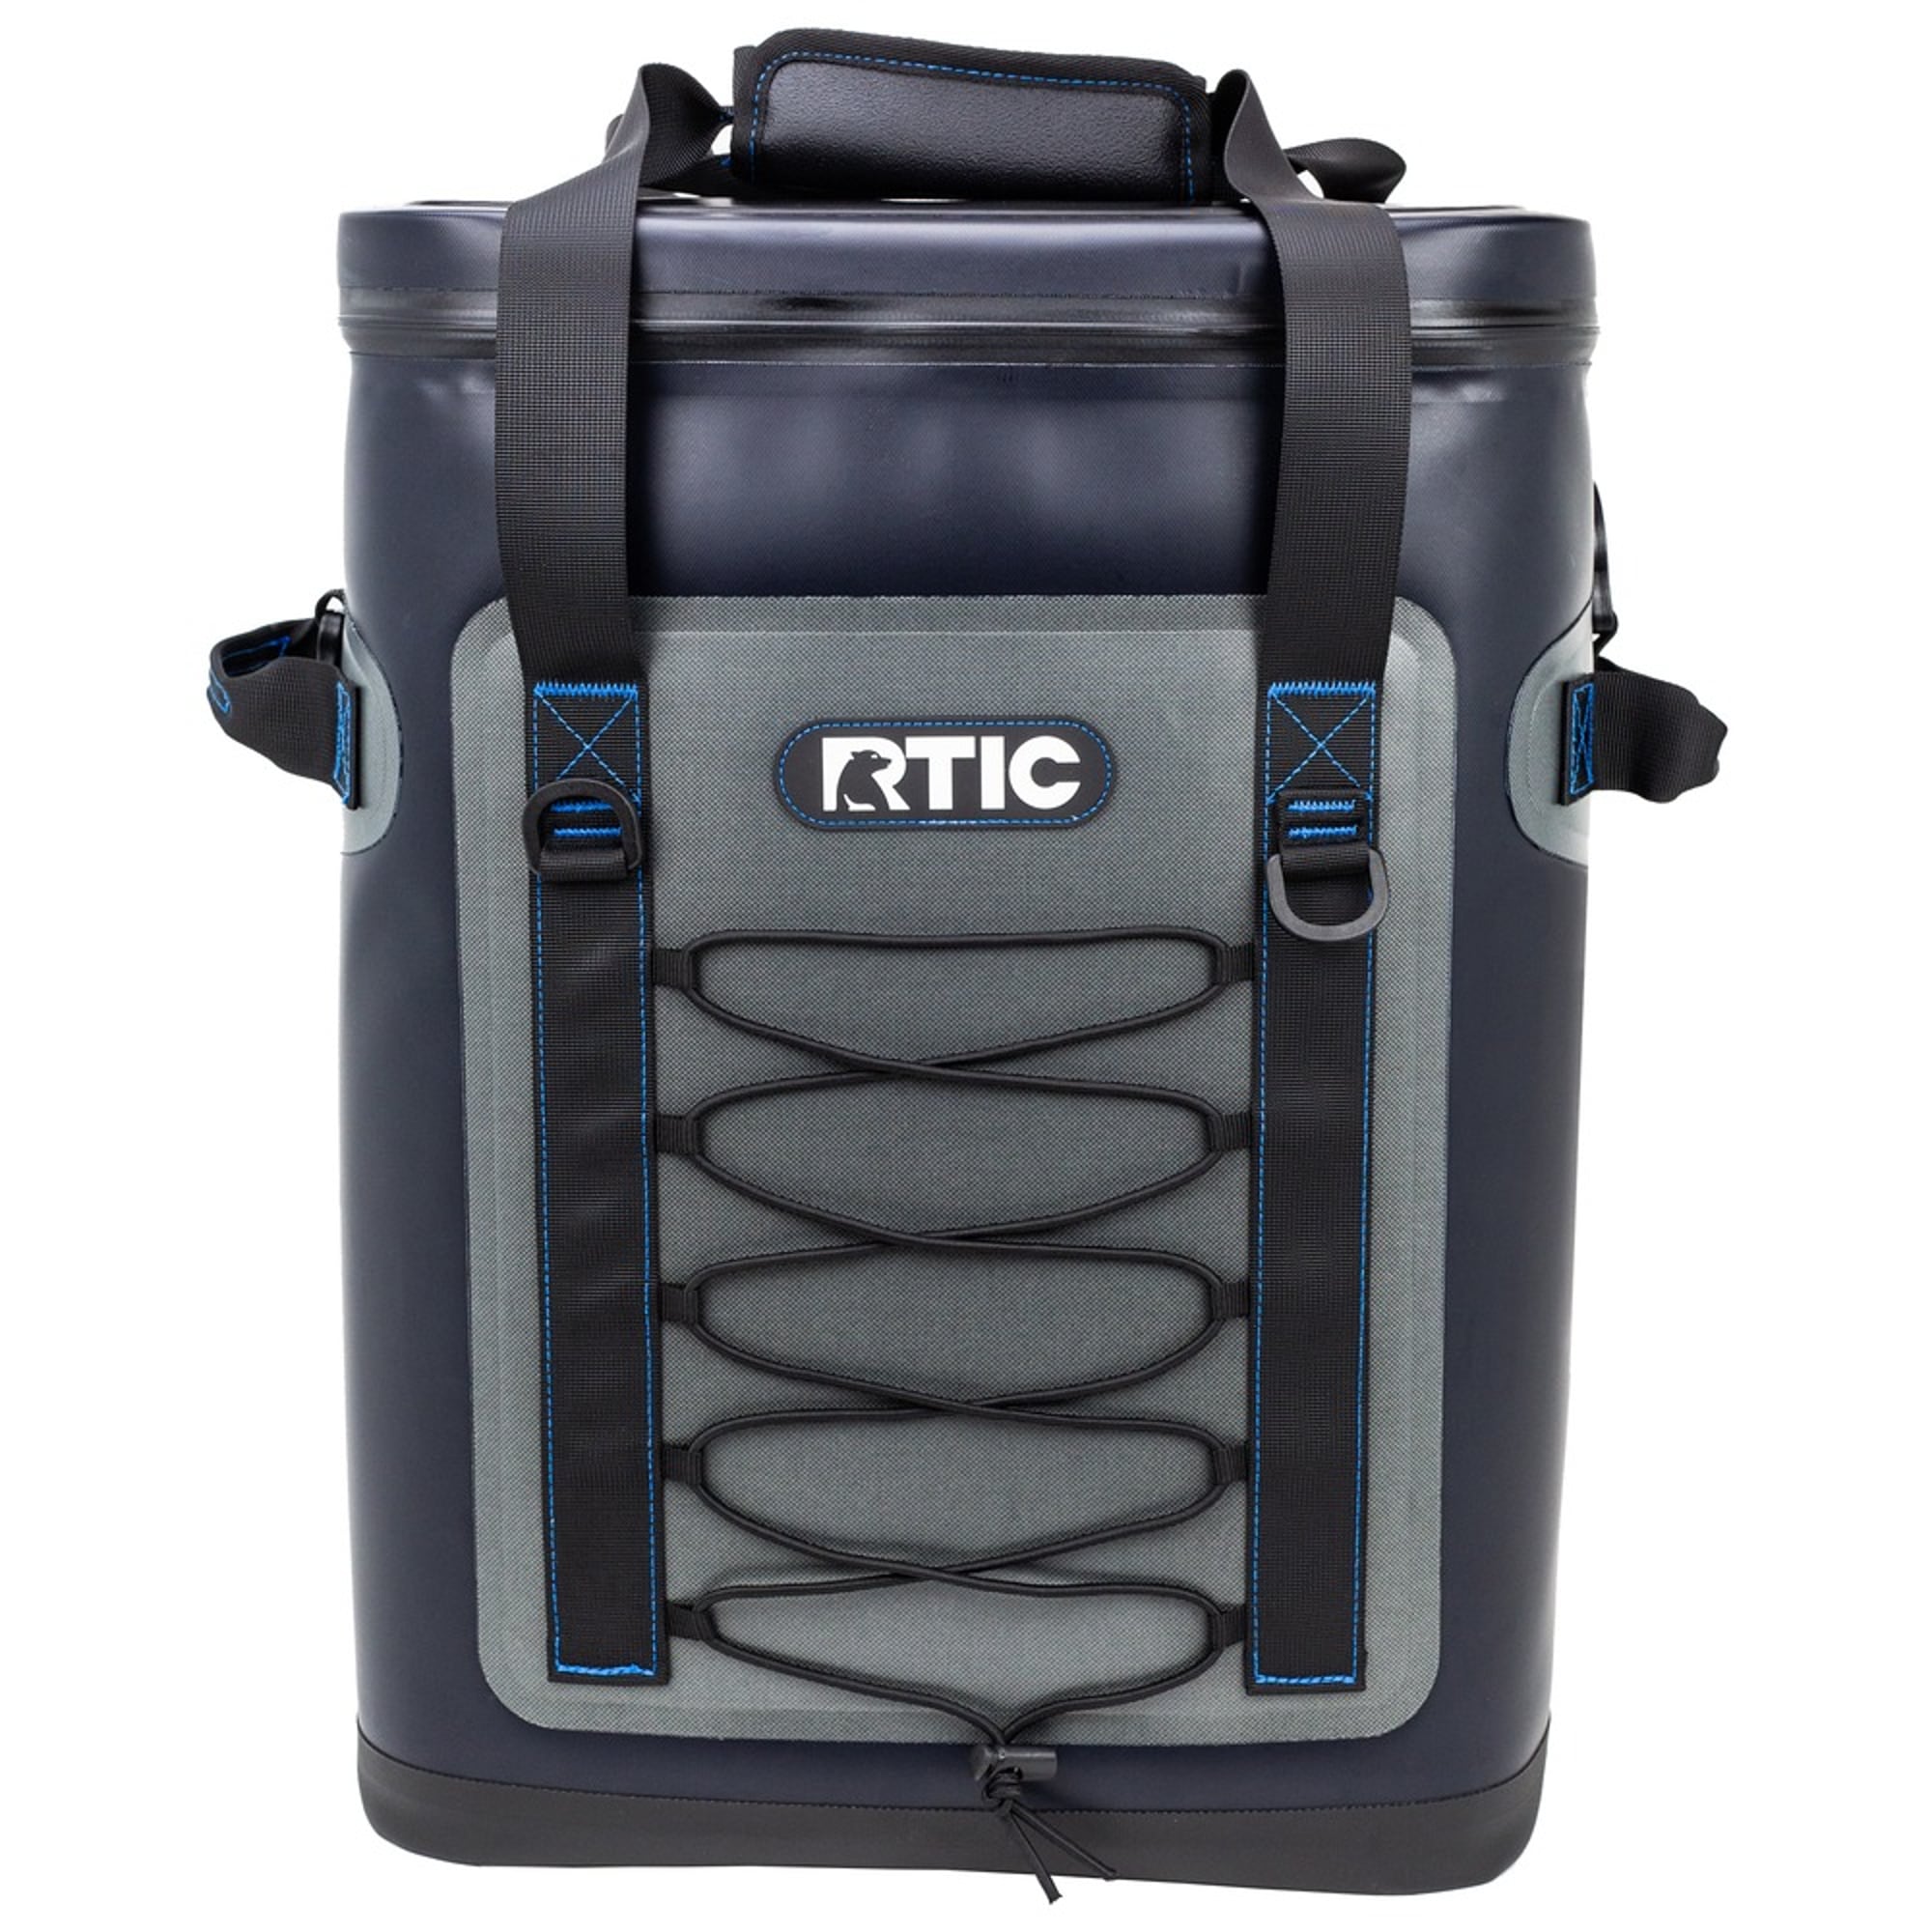 RTIC Tote Bag Review: 'Rugged & Ready' - Man Makes Fire